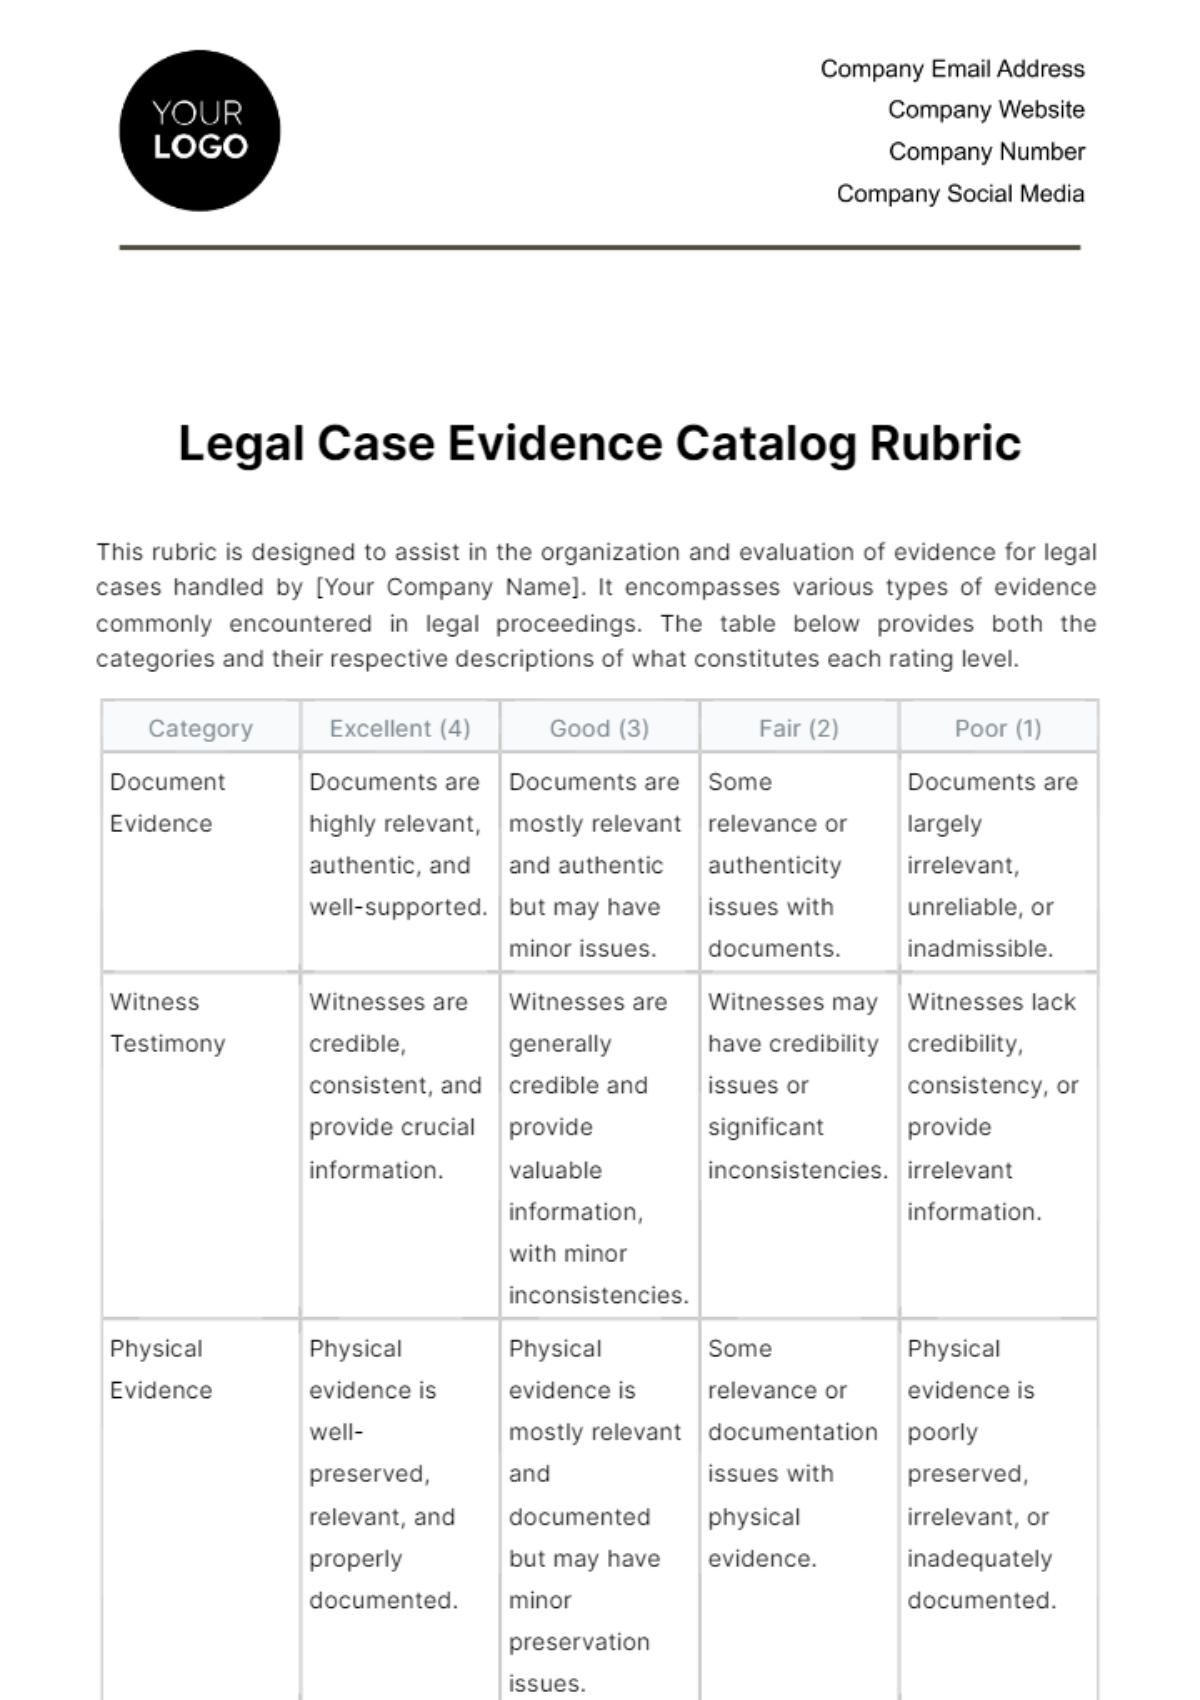 Free Legal Case Evidence Catalog Rubric Template